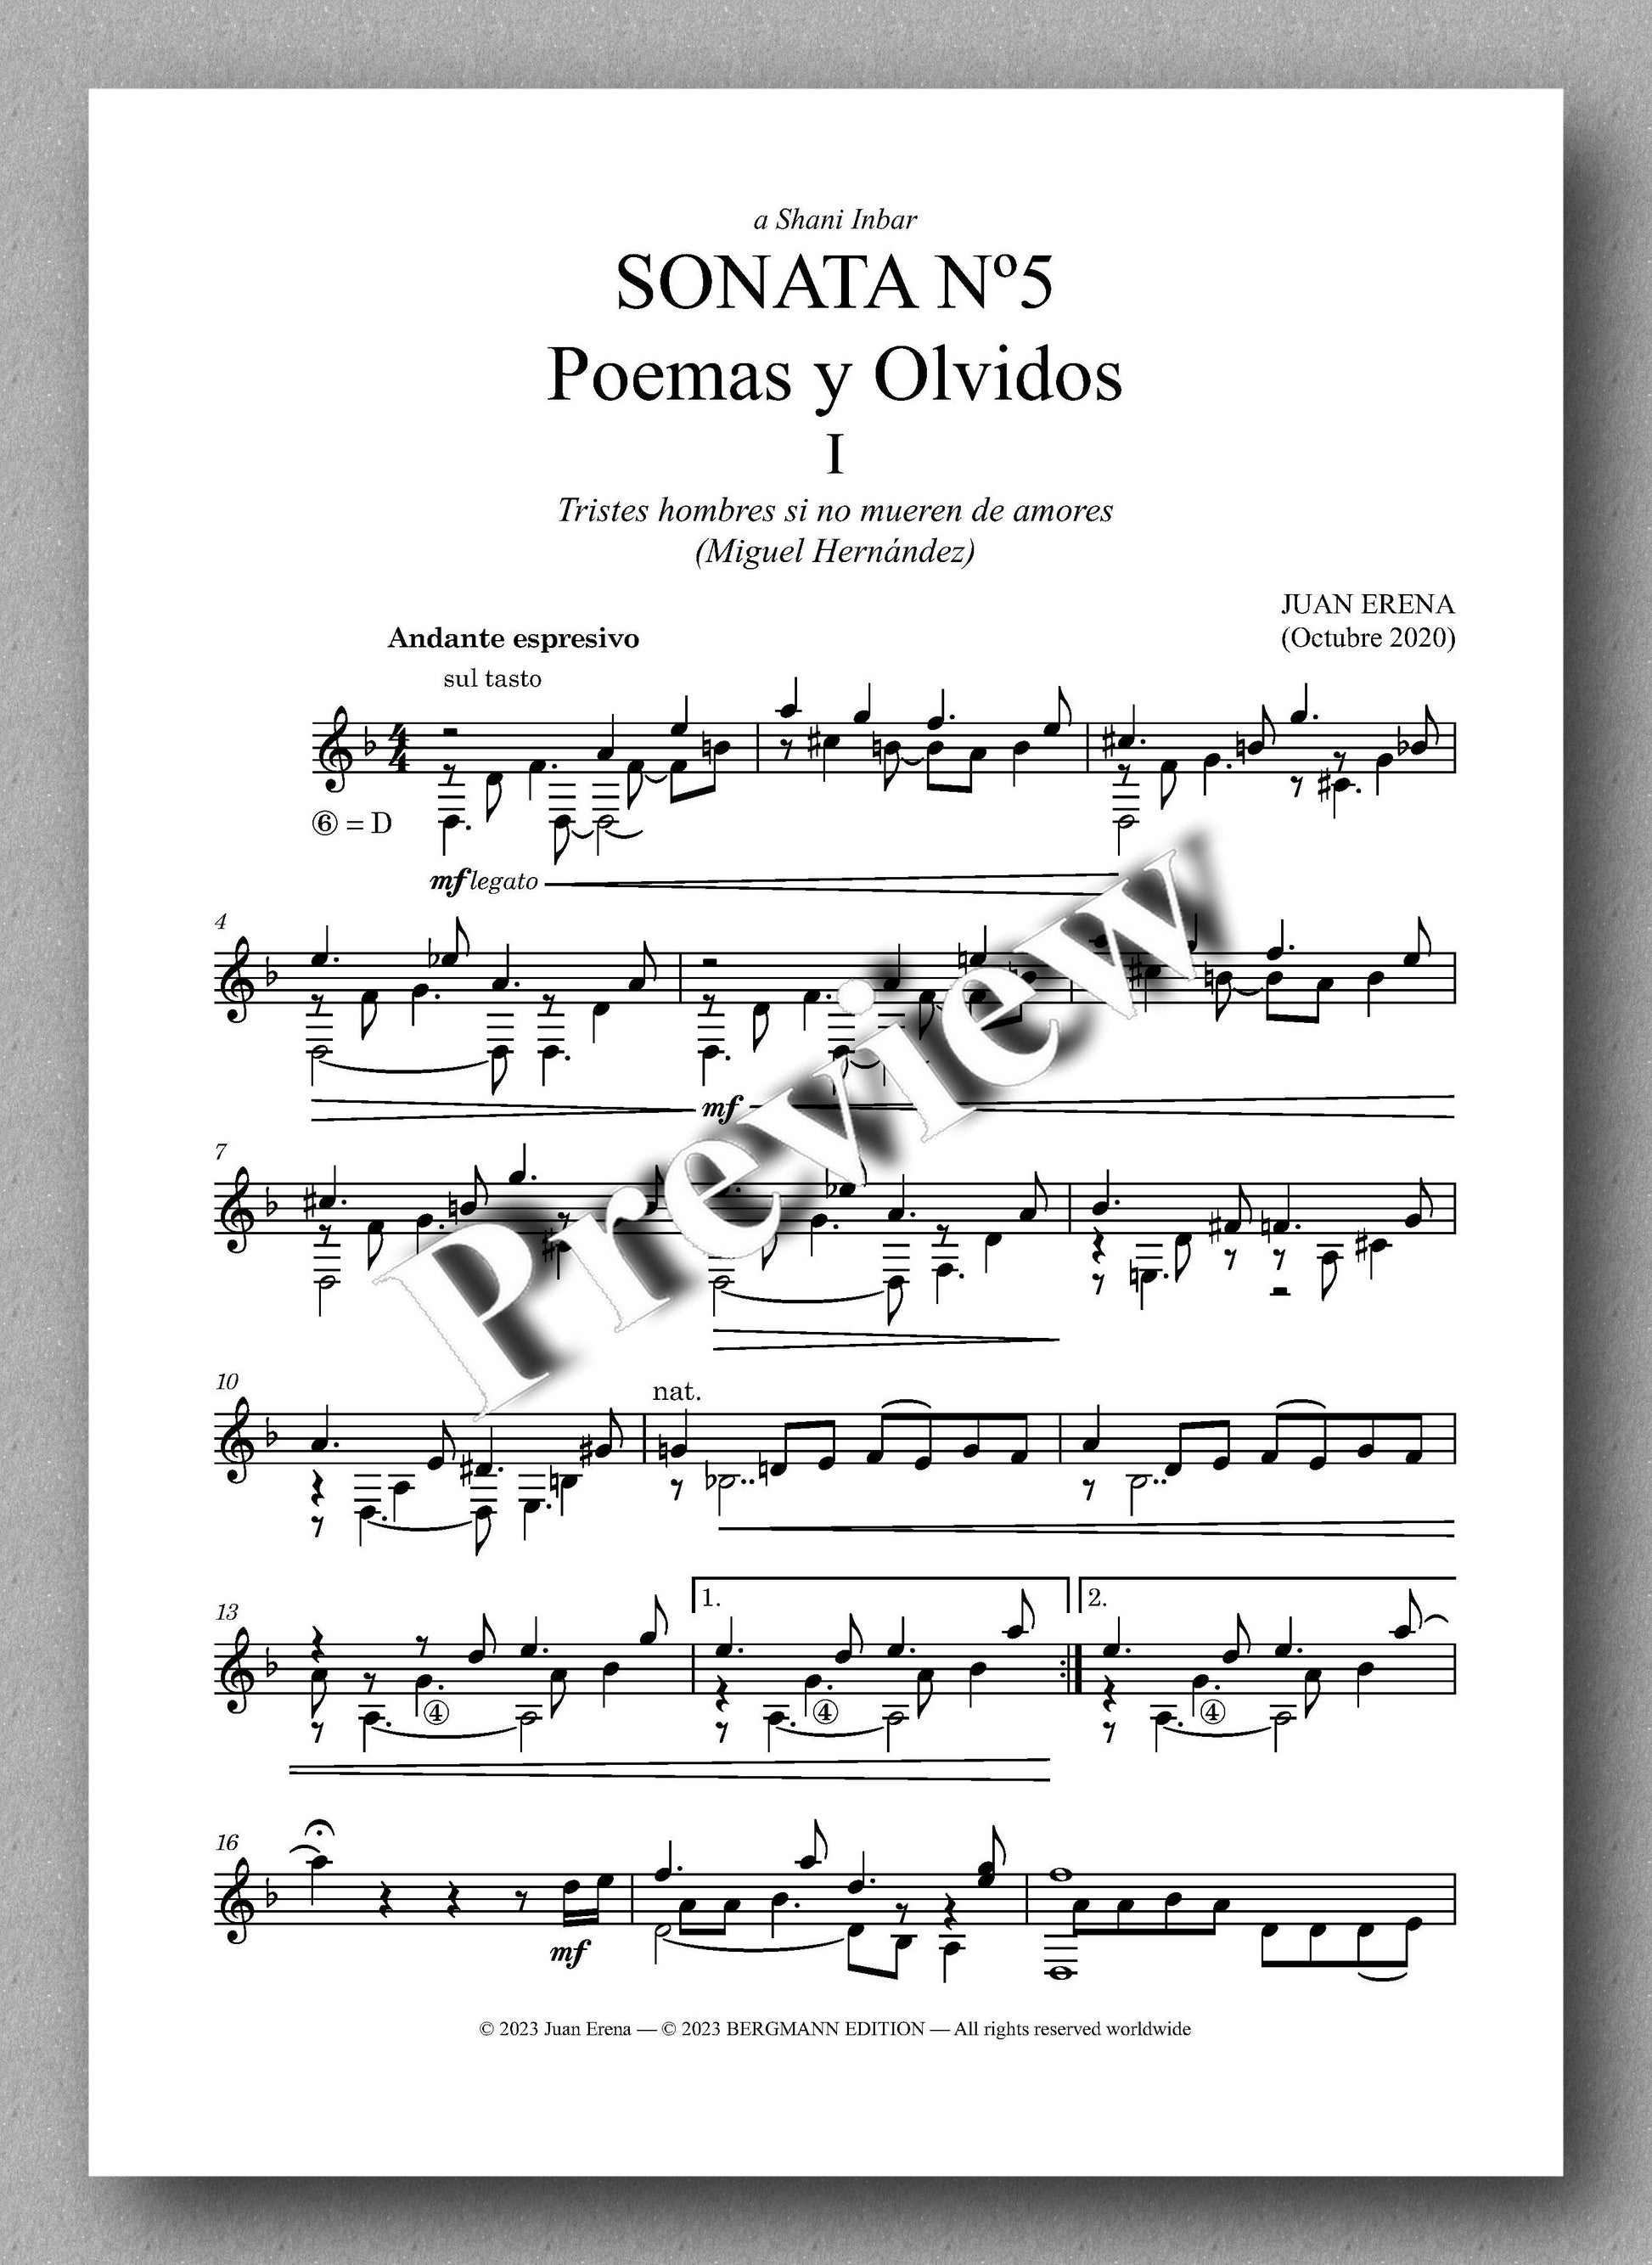 Juan Erena, Sonata V, "Poemas y Olvidos" (Poems and Oblivions) - preview of the music score 1